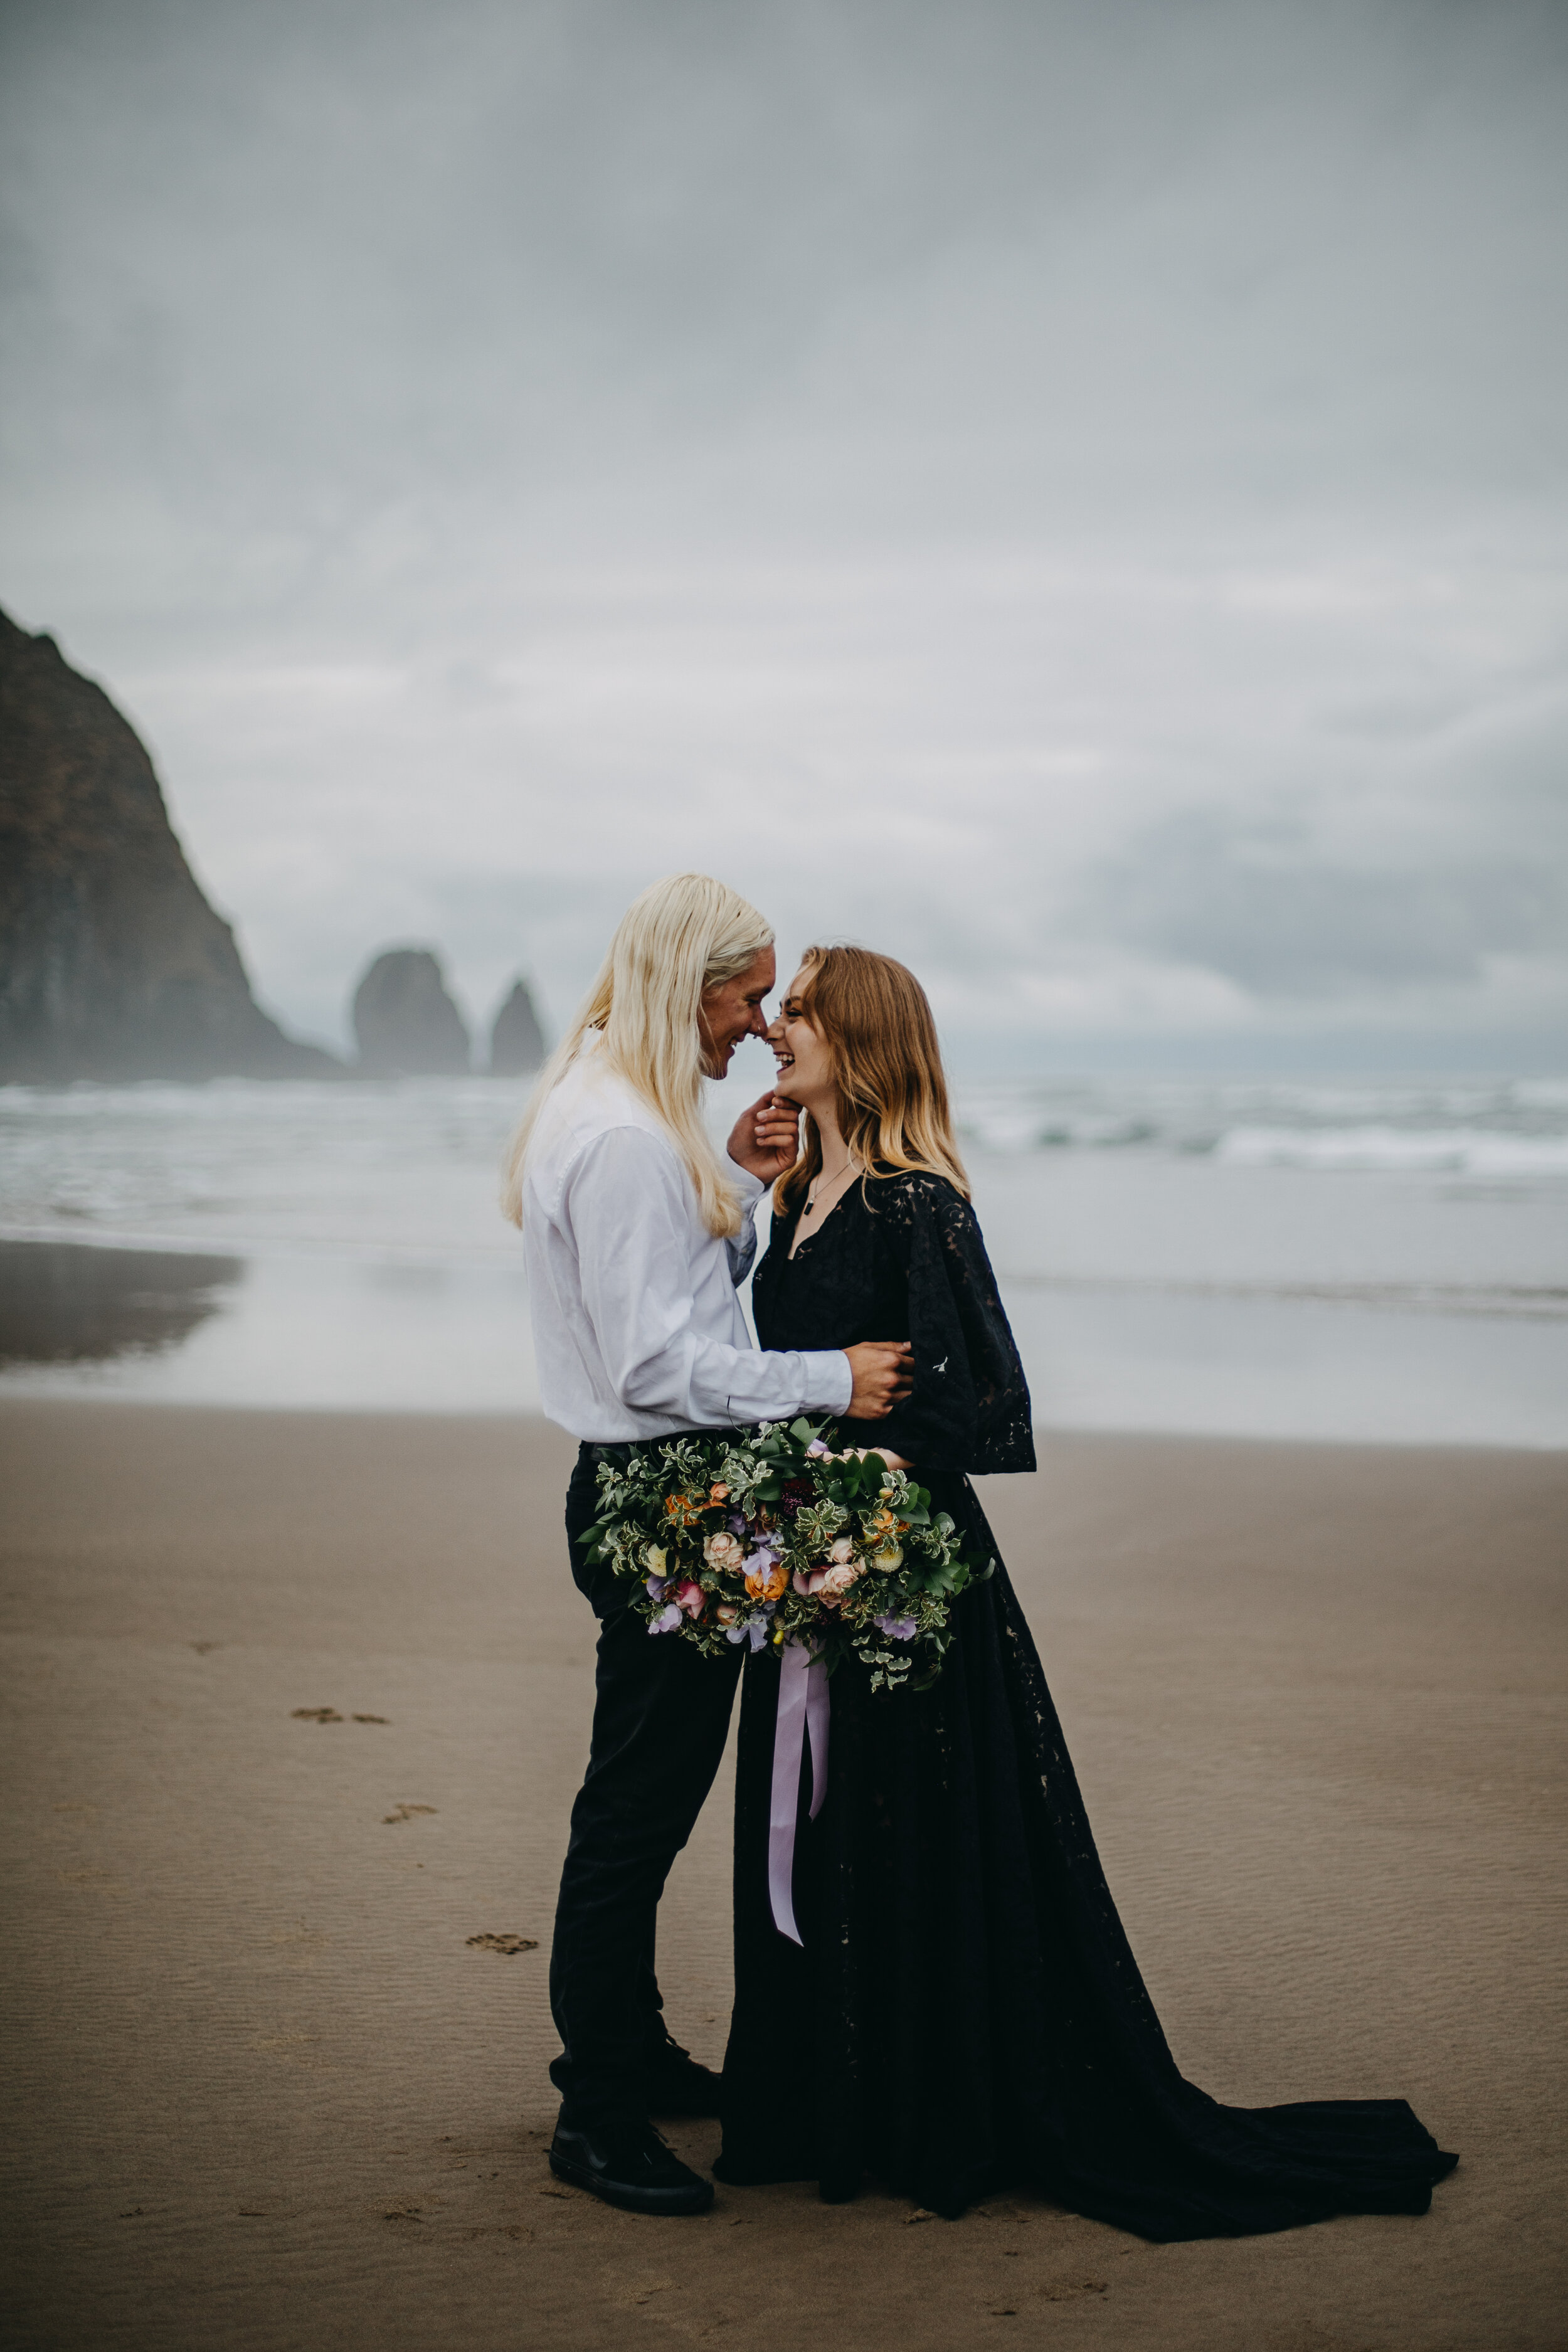 Black Dress Styled Elopement at Cannon Beach, Oregon USA